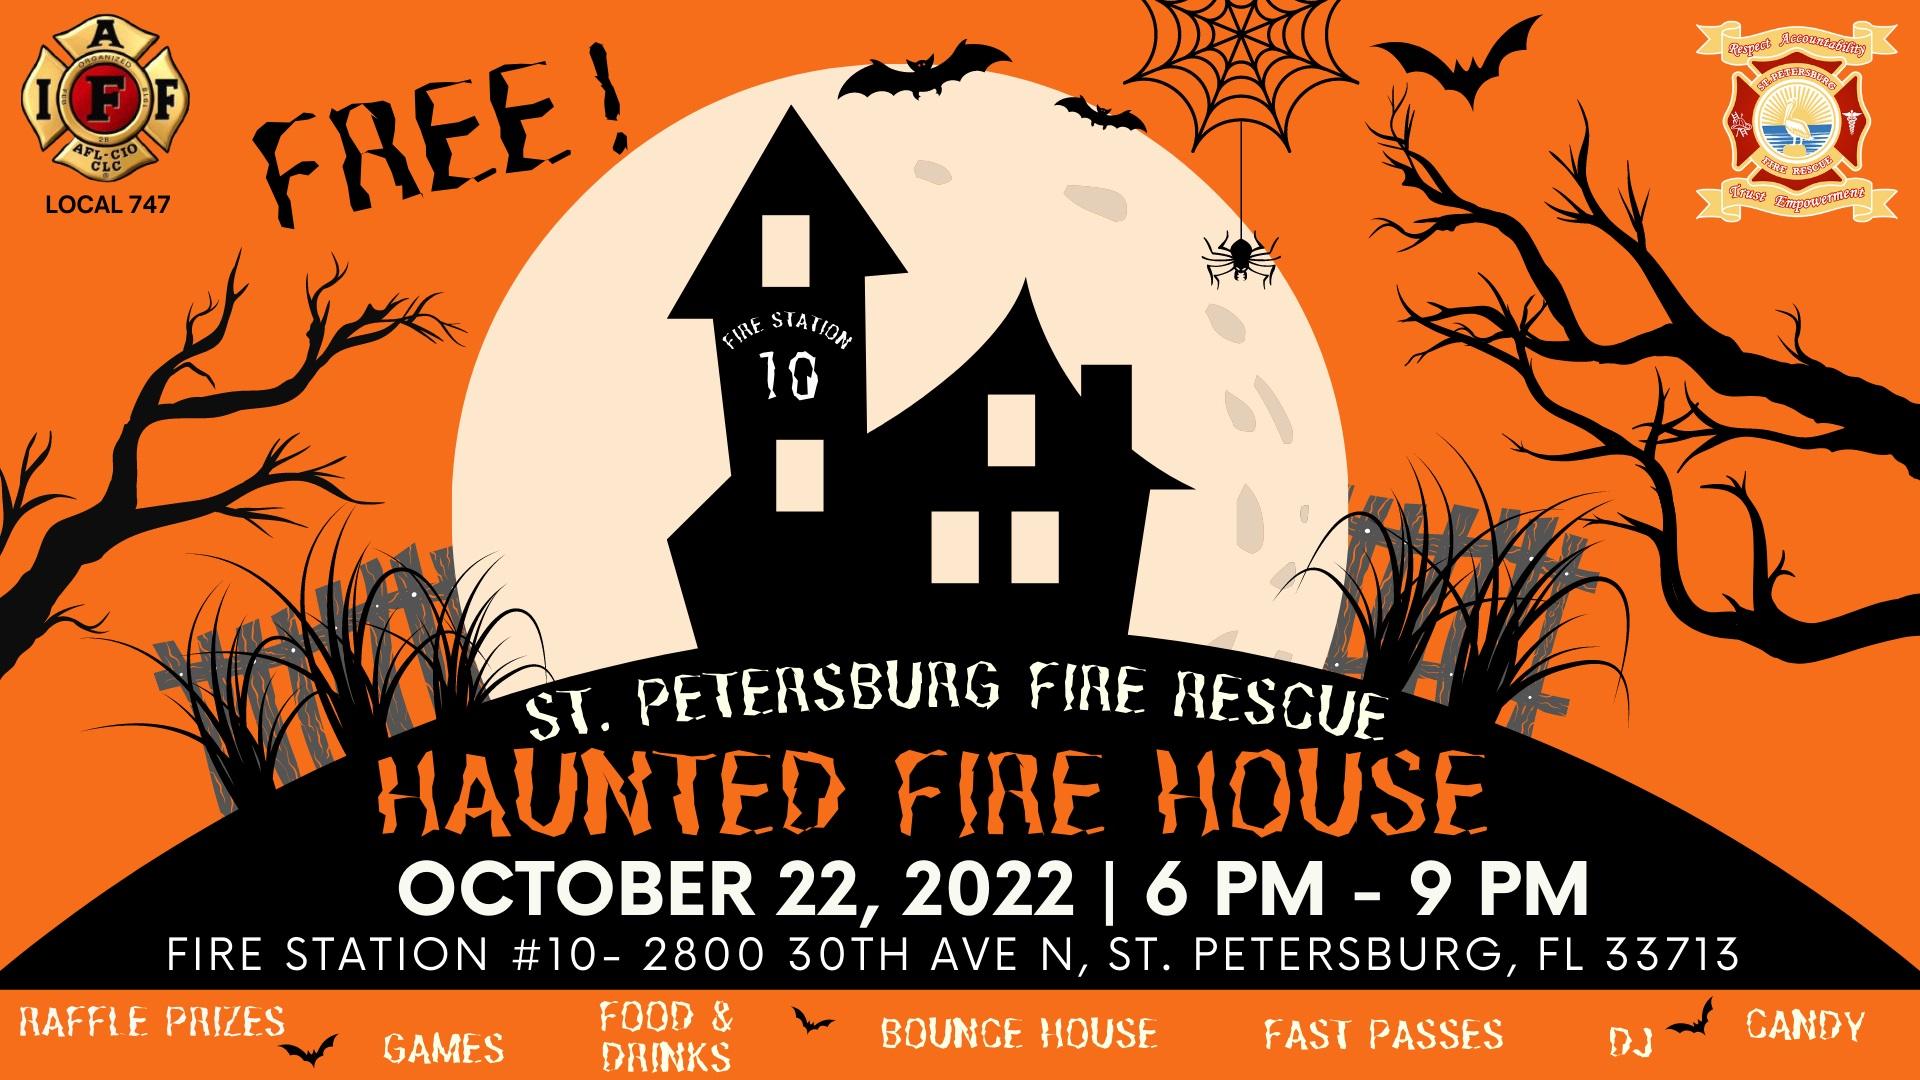 St. Petersburg Fire Rescue Haunted Fire House
Sat Oct 22, 6:00 PM - Sat Oct 22, 9:00 PM
in 2 days